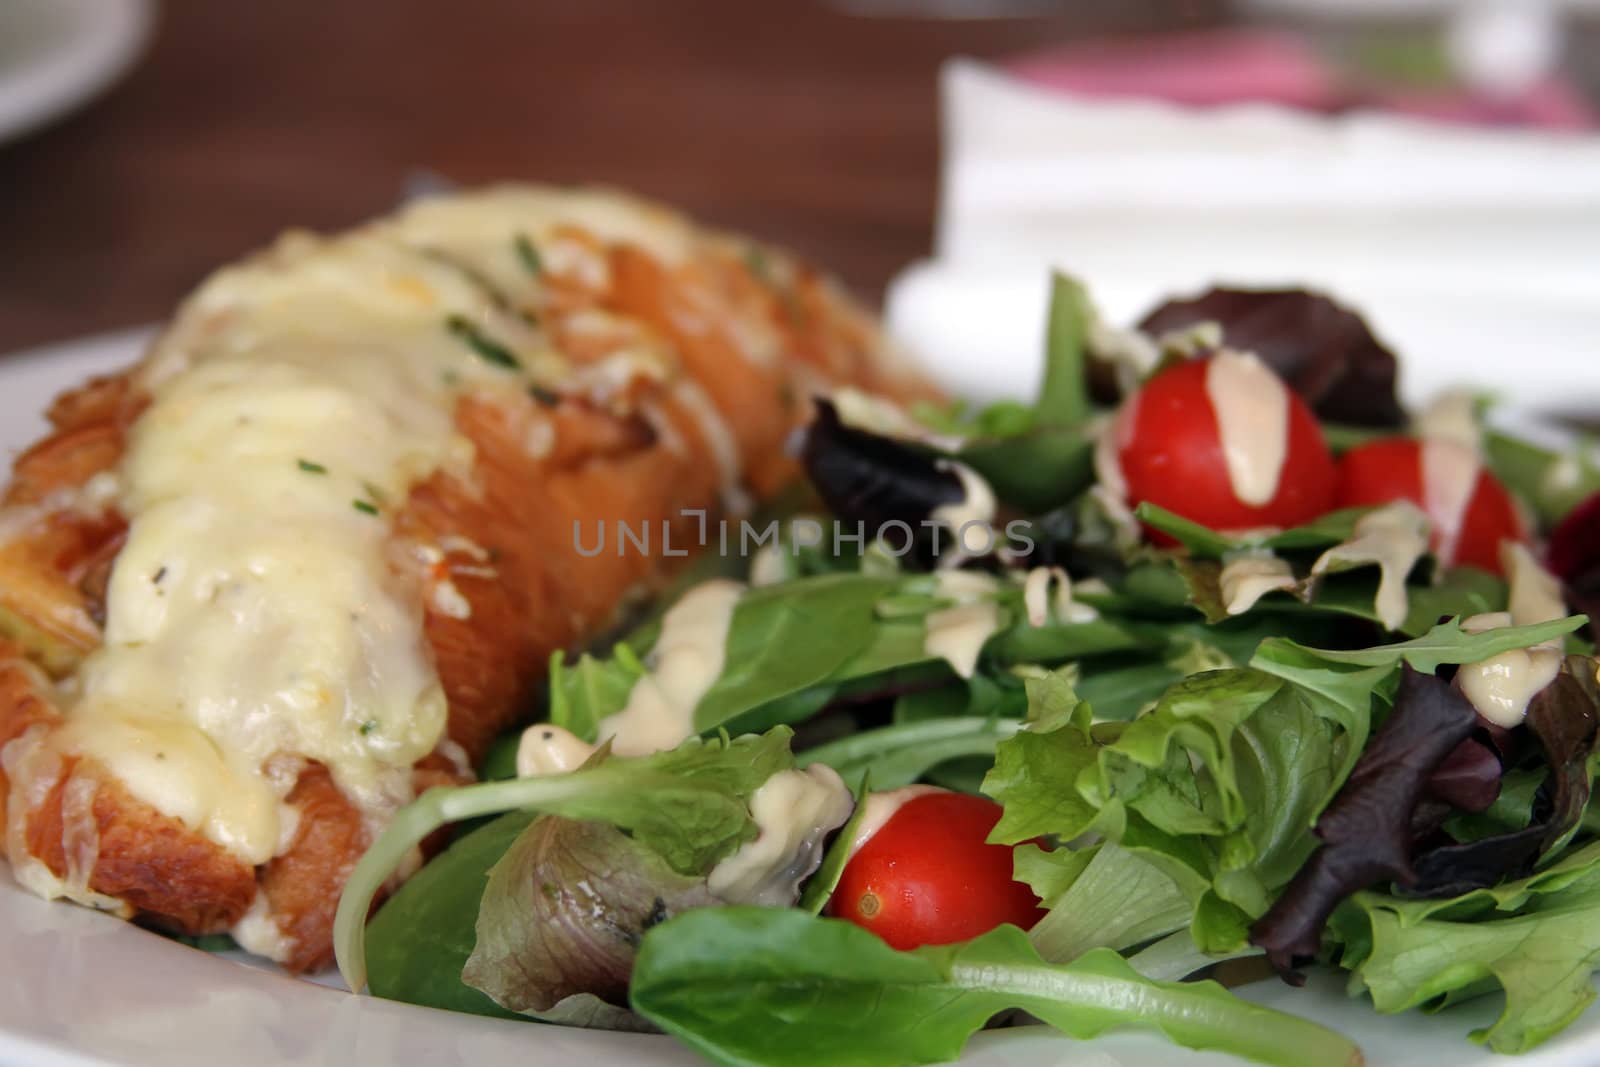 Chicken Croissant with cheese and a side of salad by Davidgn